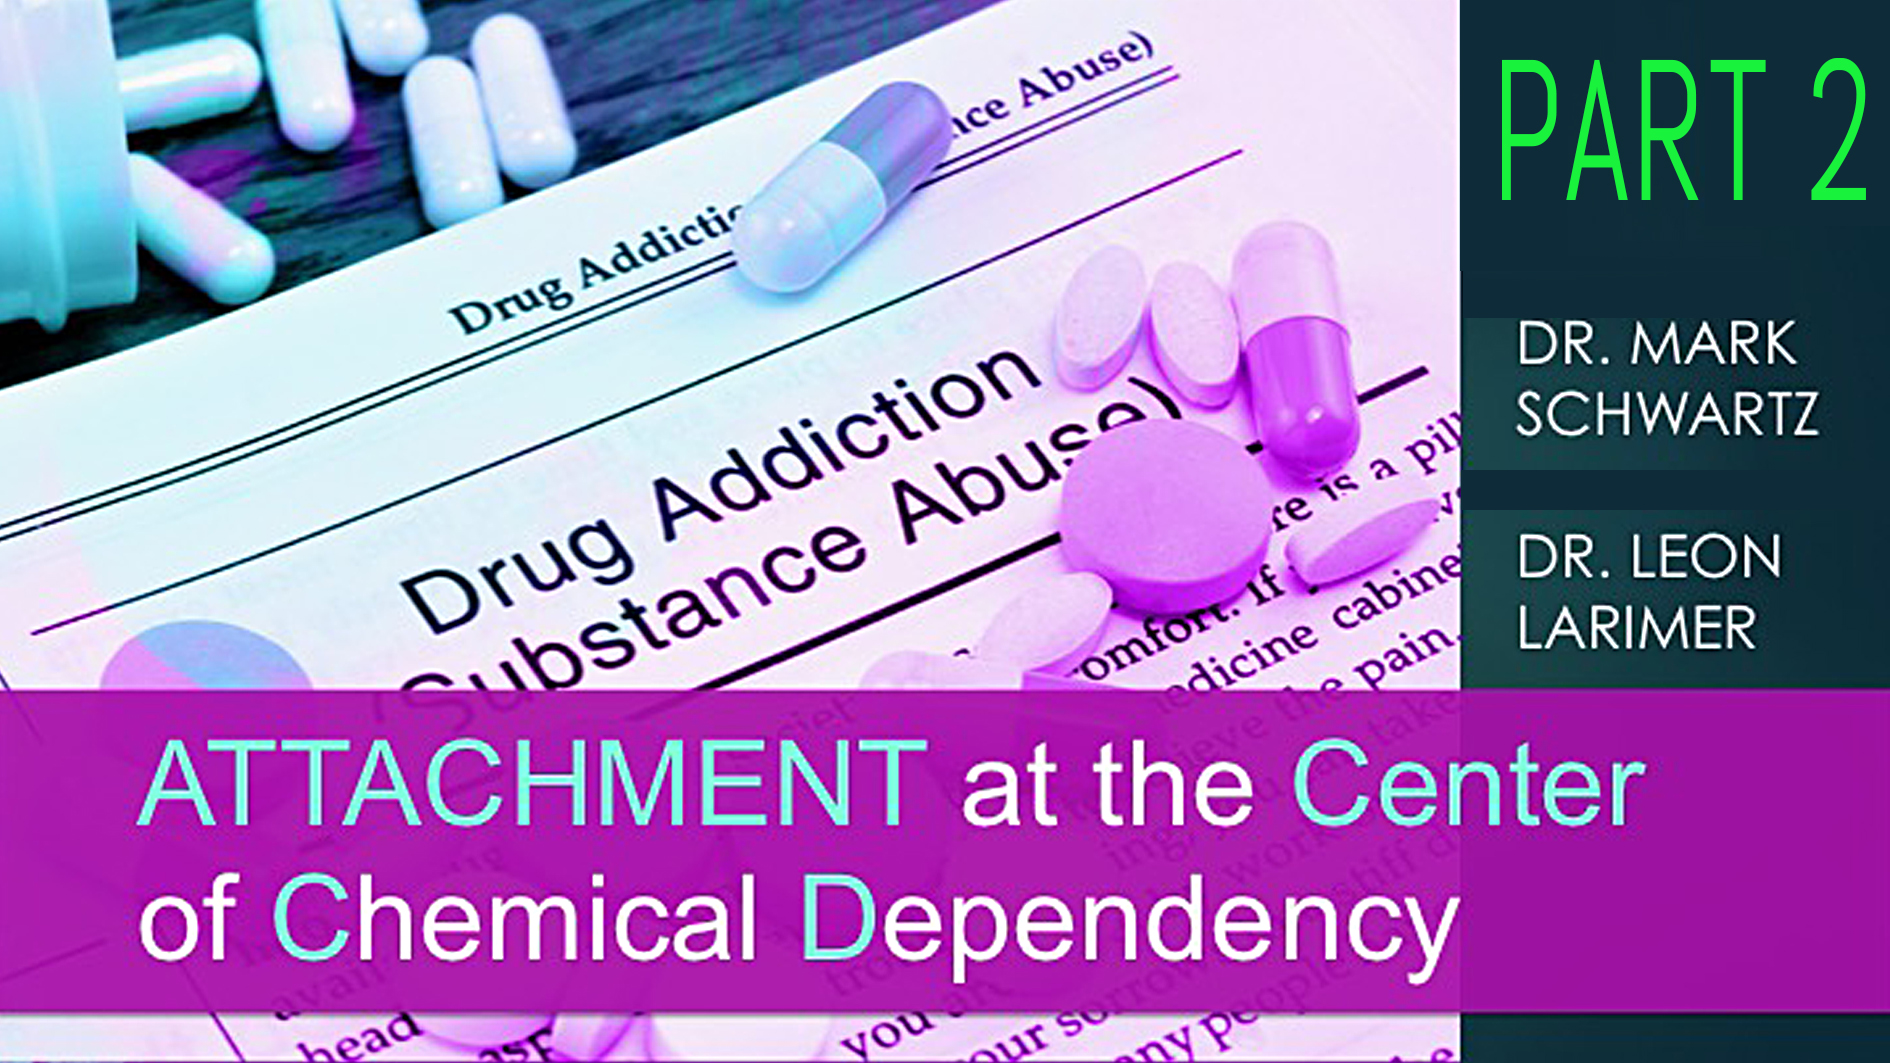 WEBINAR VIDEO – PART 2:  “Attachment at the Center of Chemical Dependency”